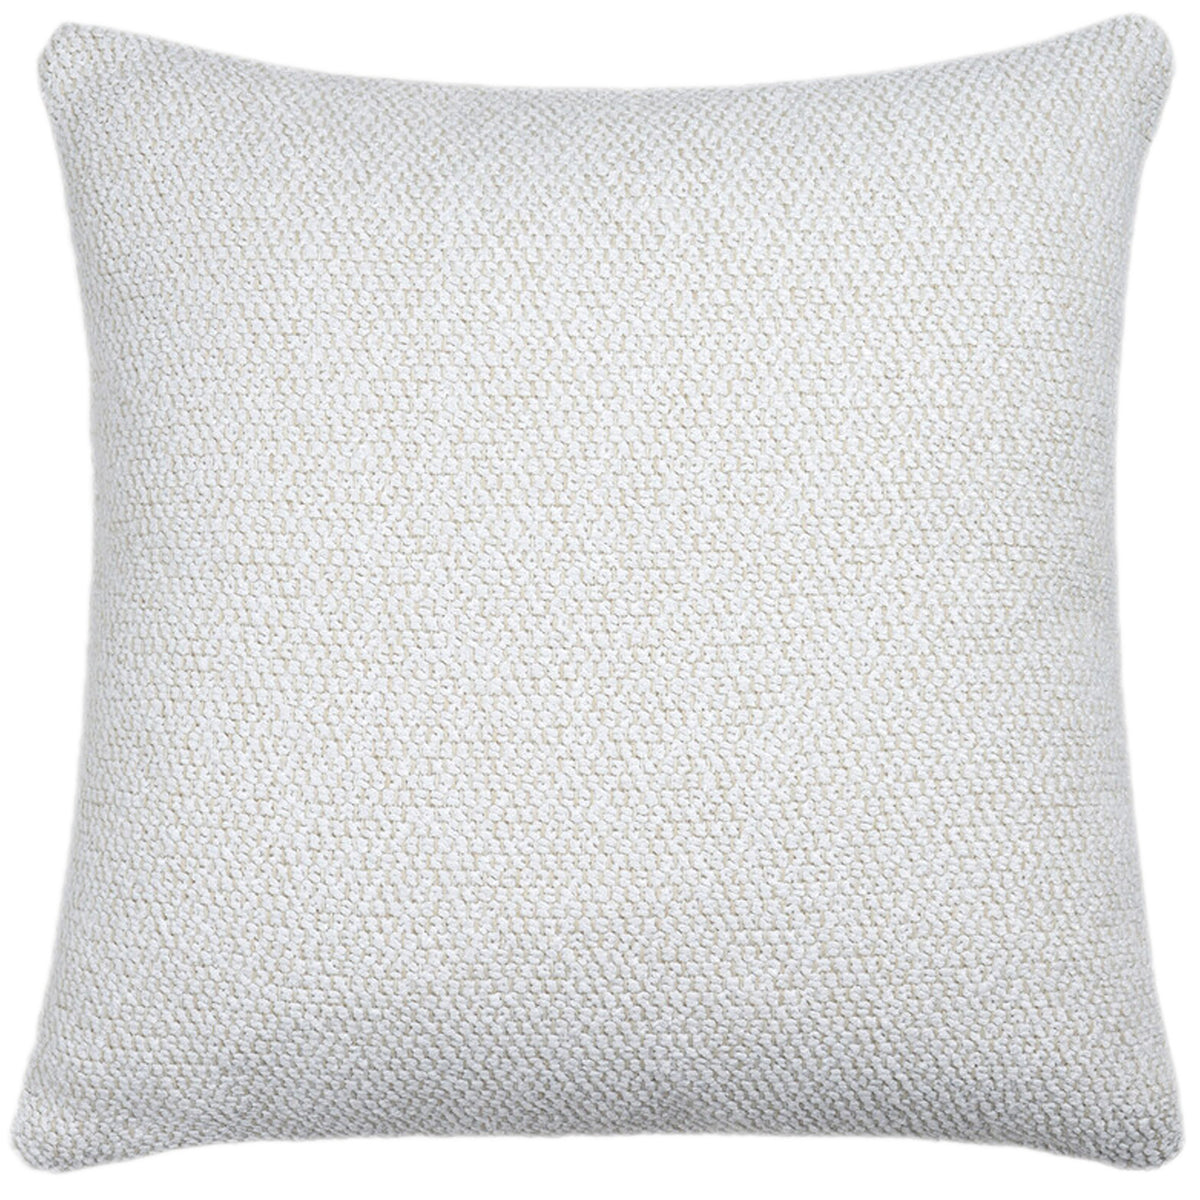 Square Boucle Outdoor Cushion, Set of 2